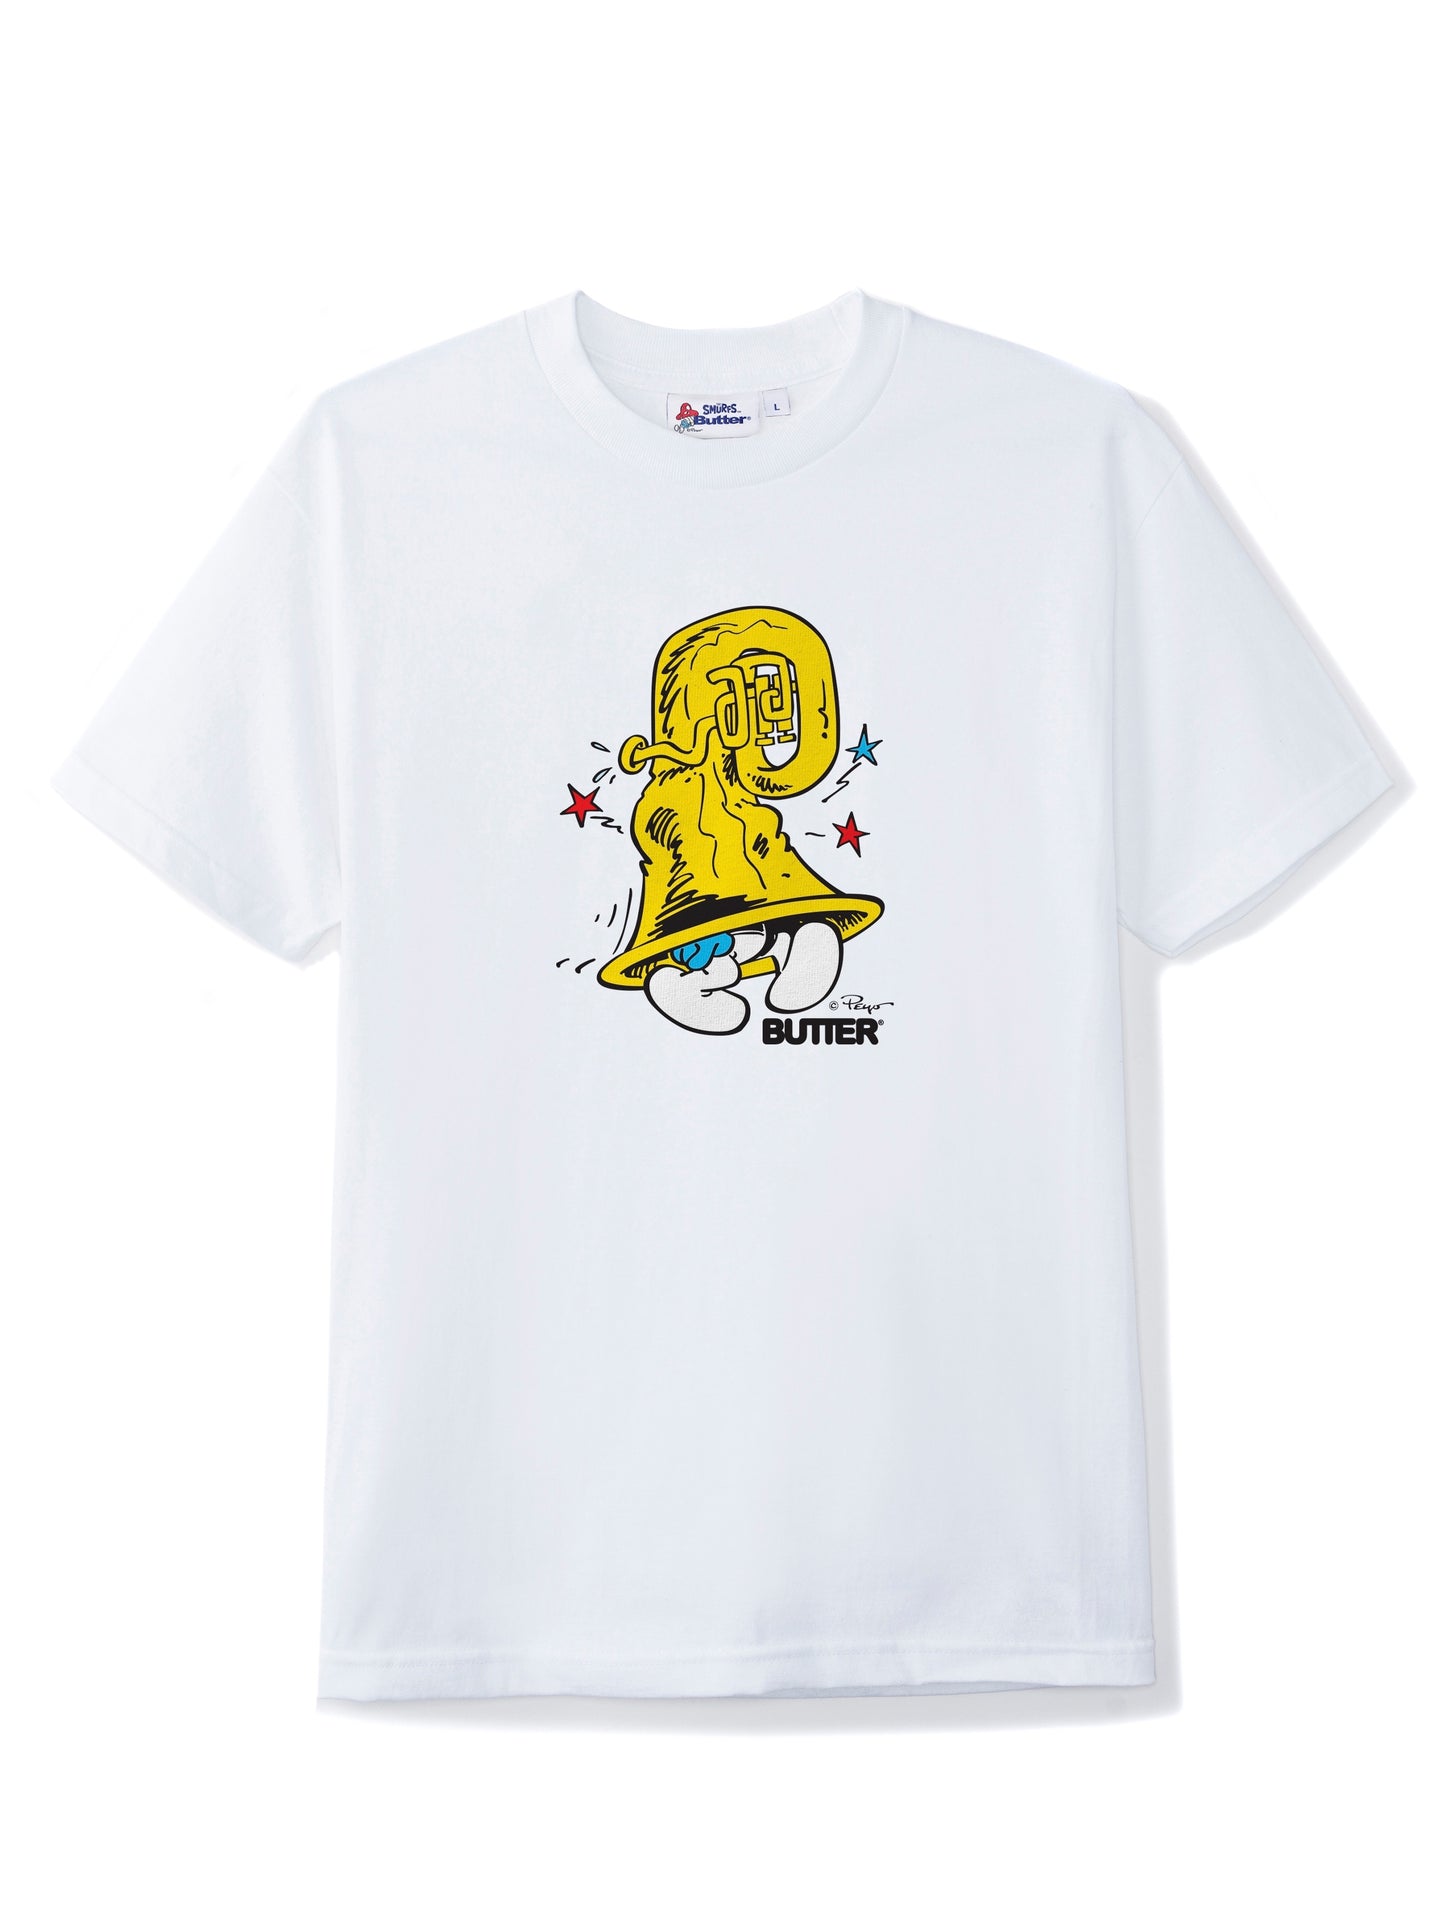 BUTTER GOODS x The Smurfs Harmony Tee - White